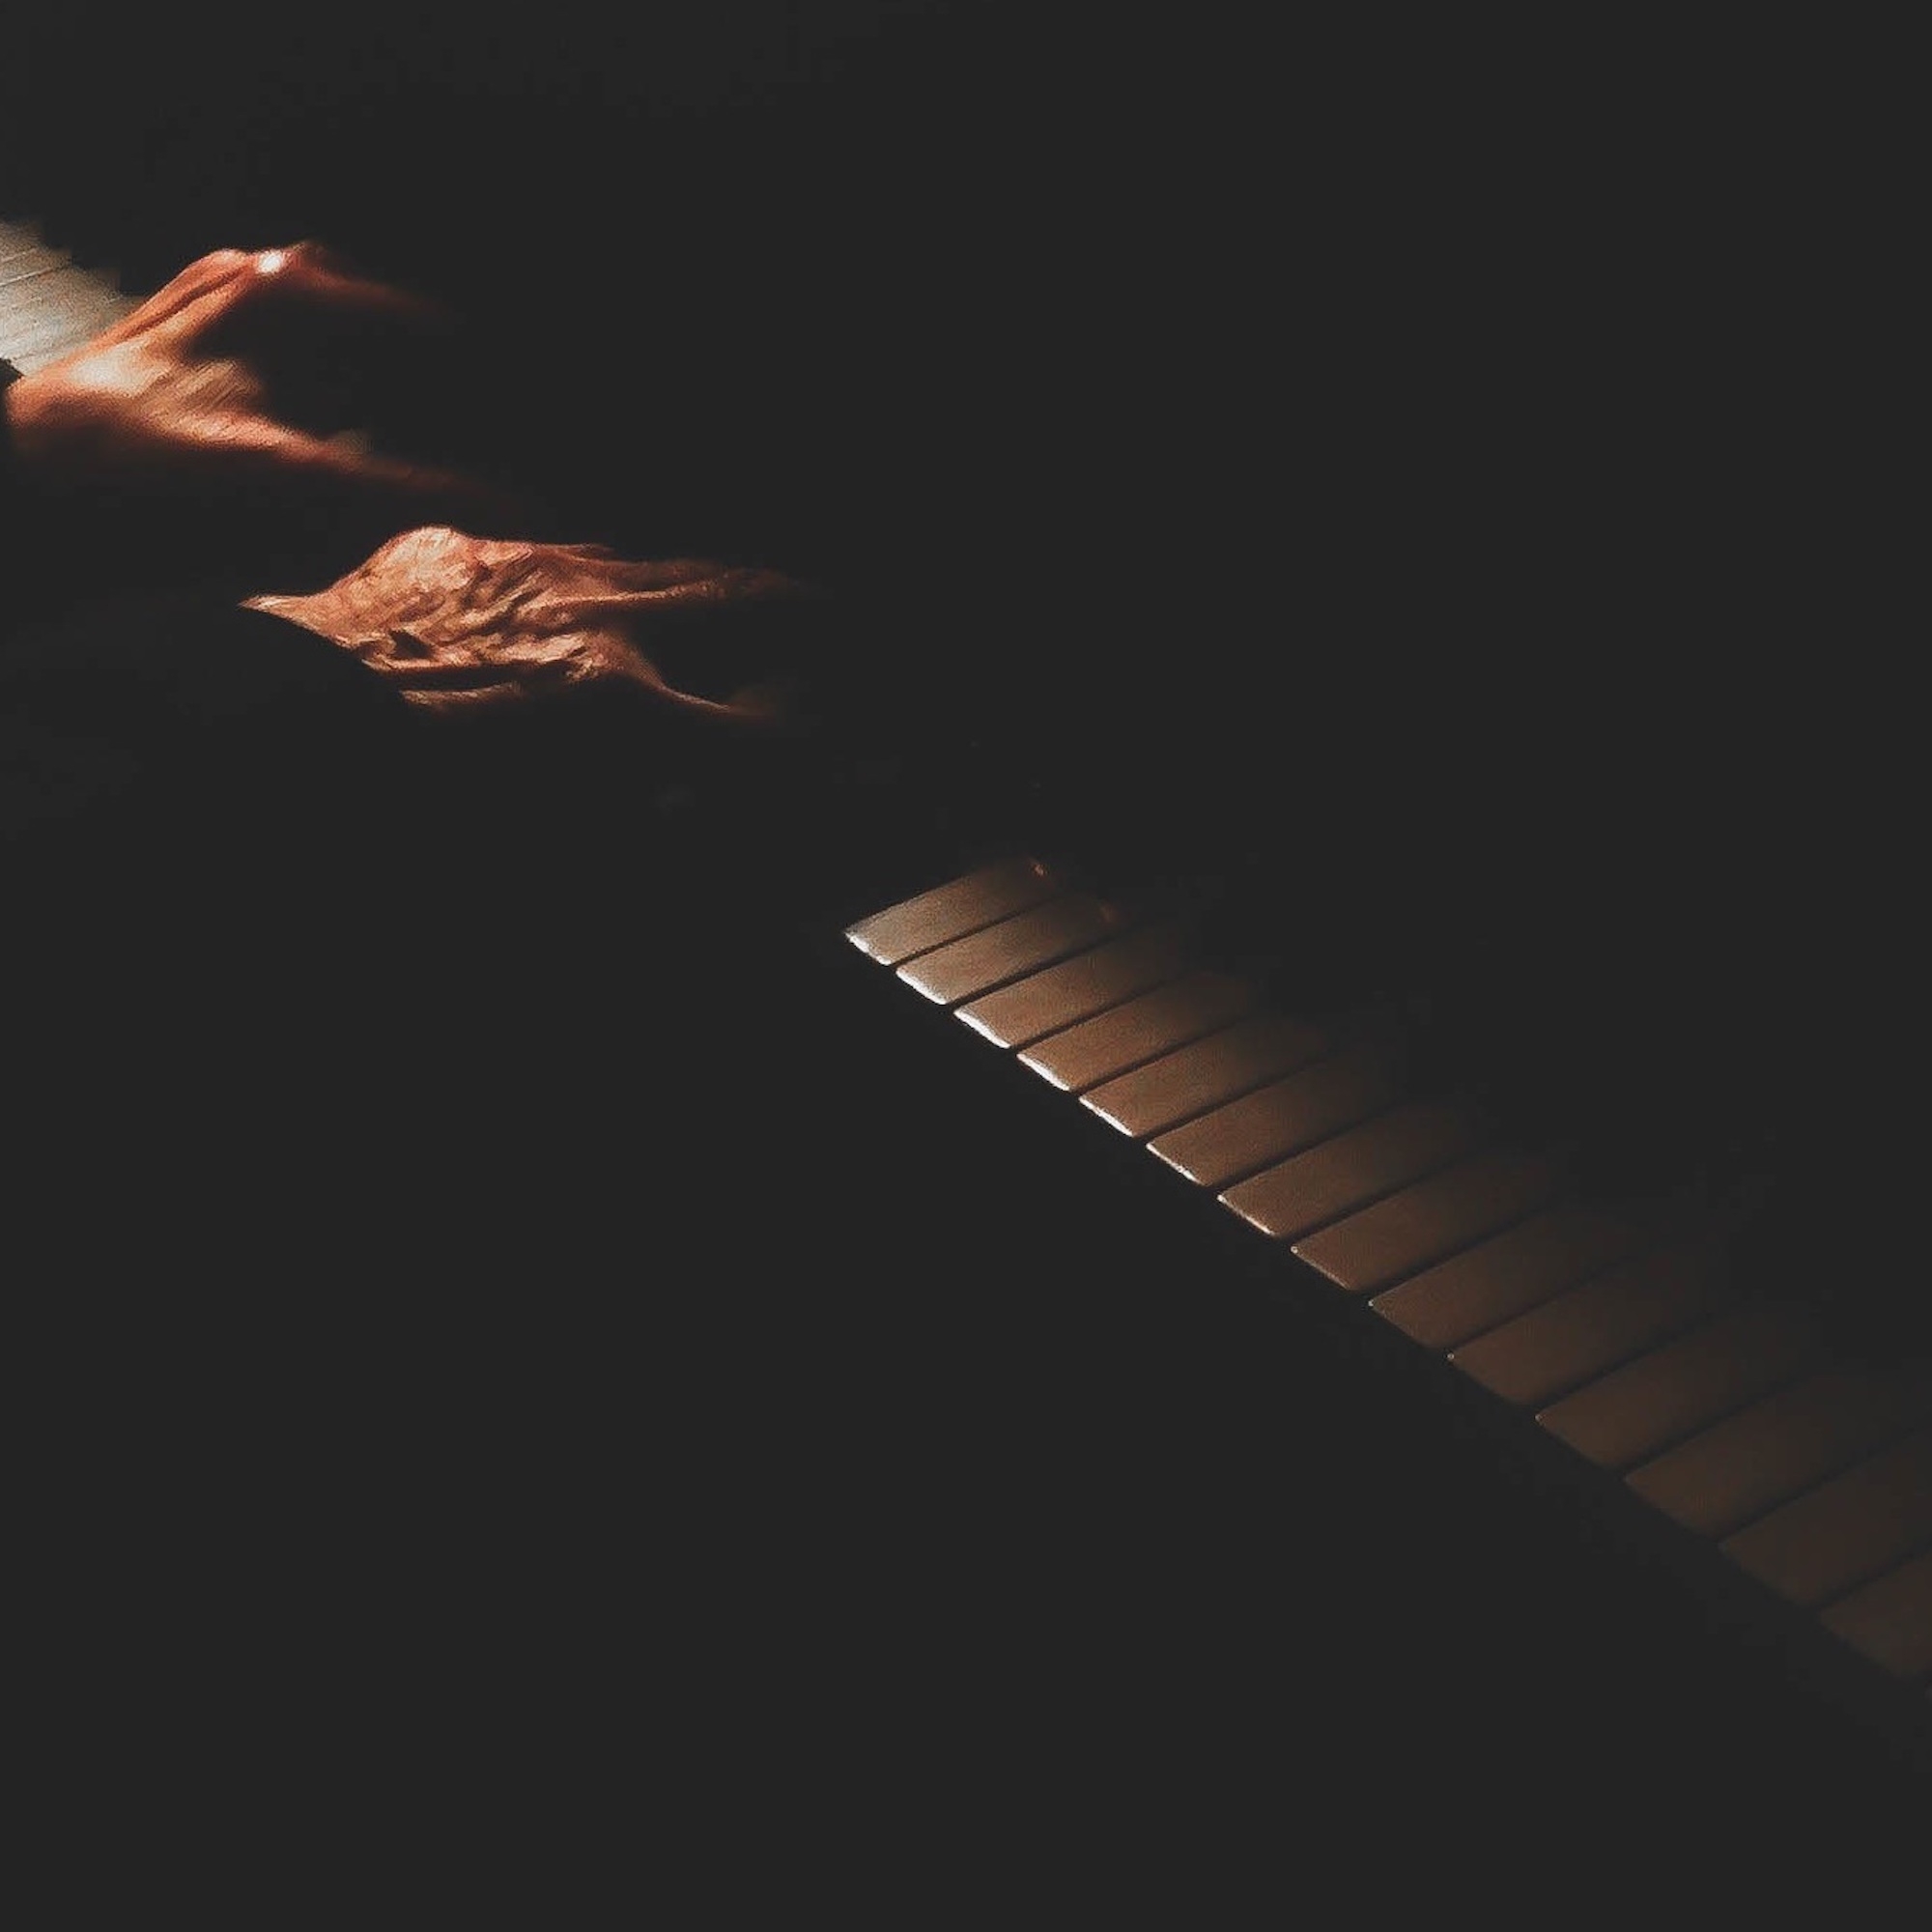 Soft Piano Tunes - a Timeless Mix of Soothing Melodies for Intimacy, Focus, & Stress Relief